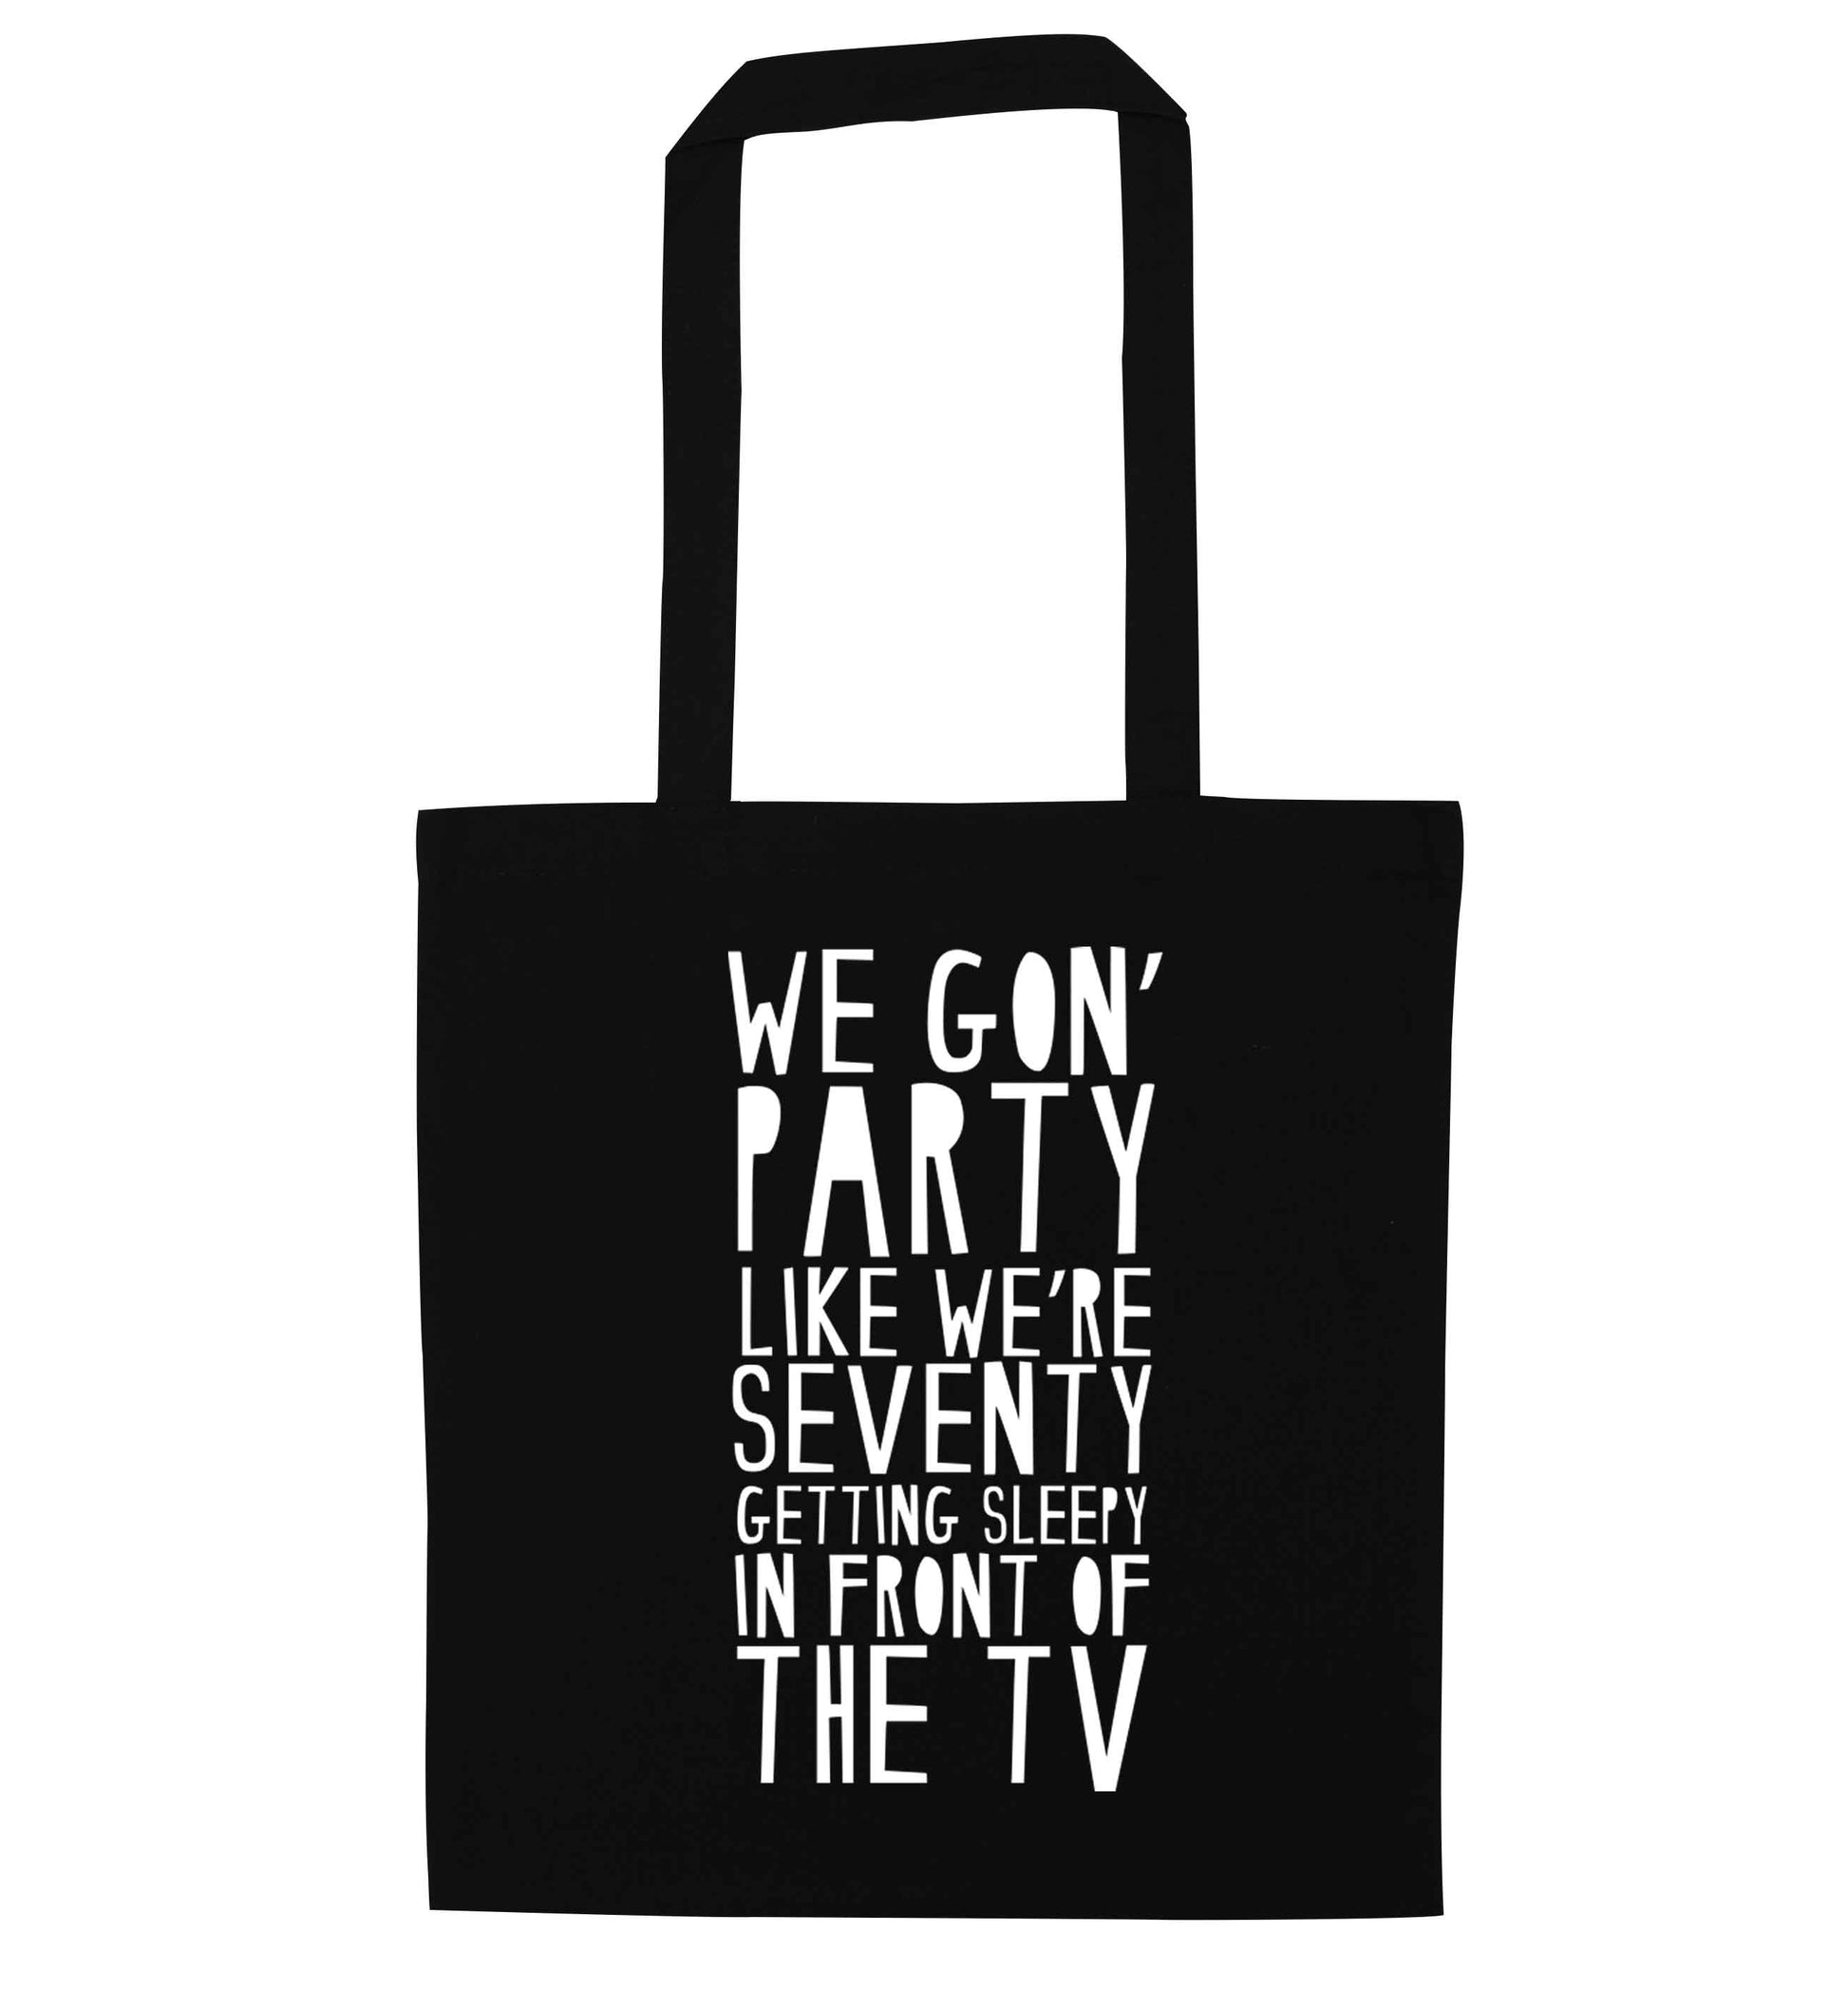 We gon' party like we're seventy getting sleepy in front of the TV black tote bag